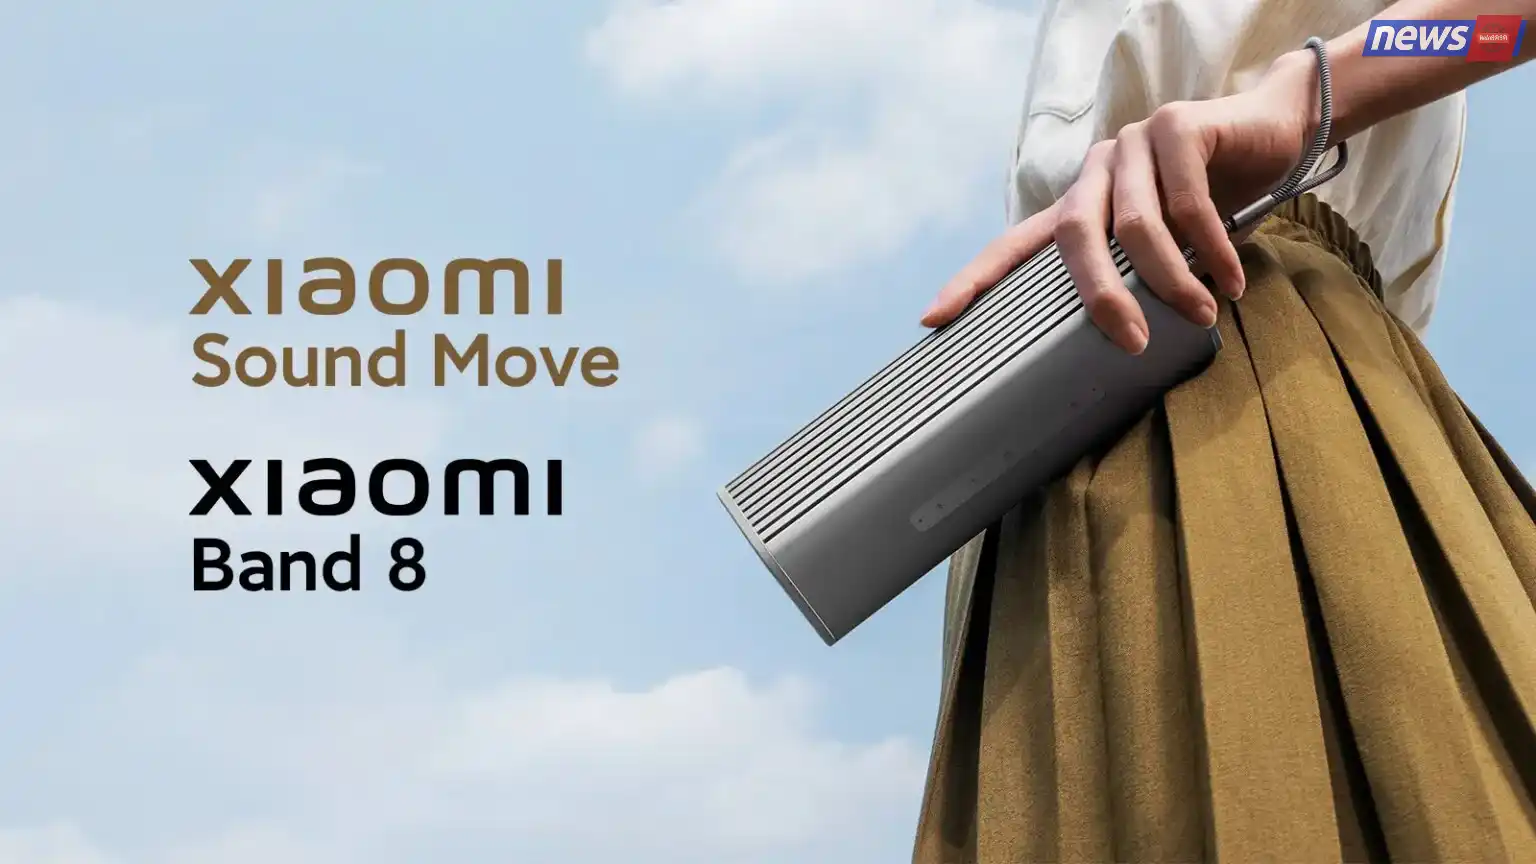 The Xiaomi Band 8 and Sound Move portable Bluetooth speaker has been unveiled!